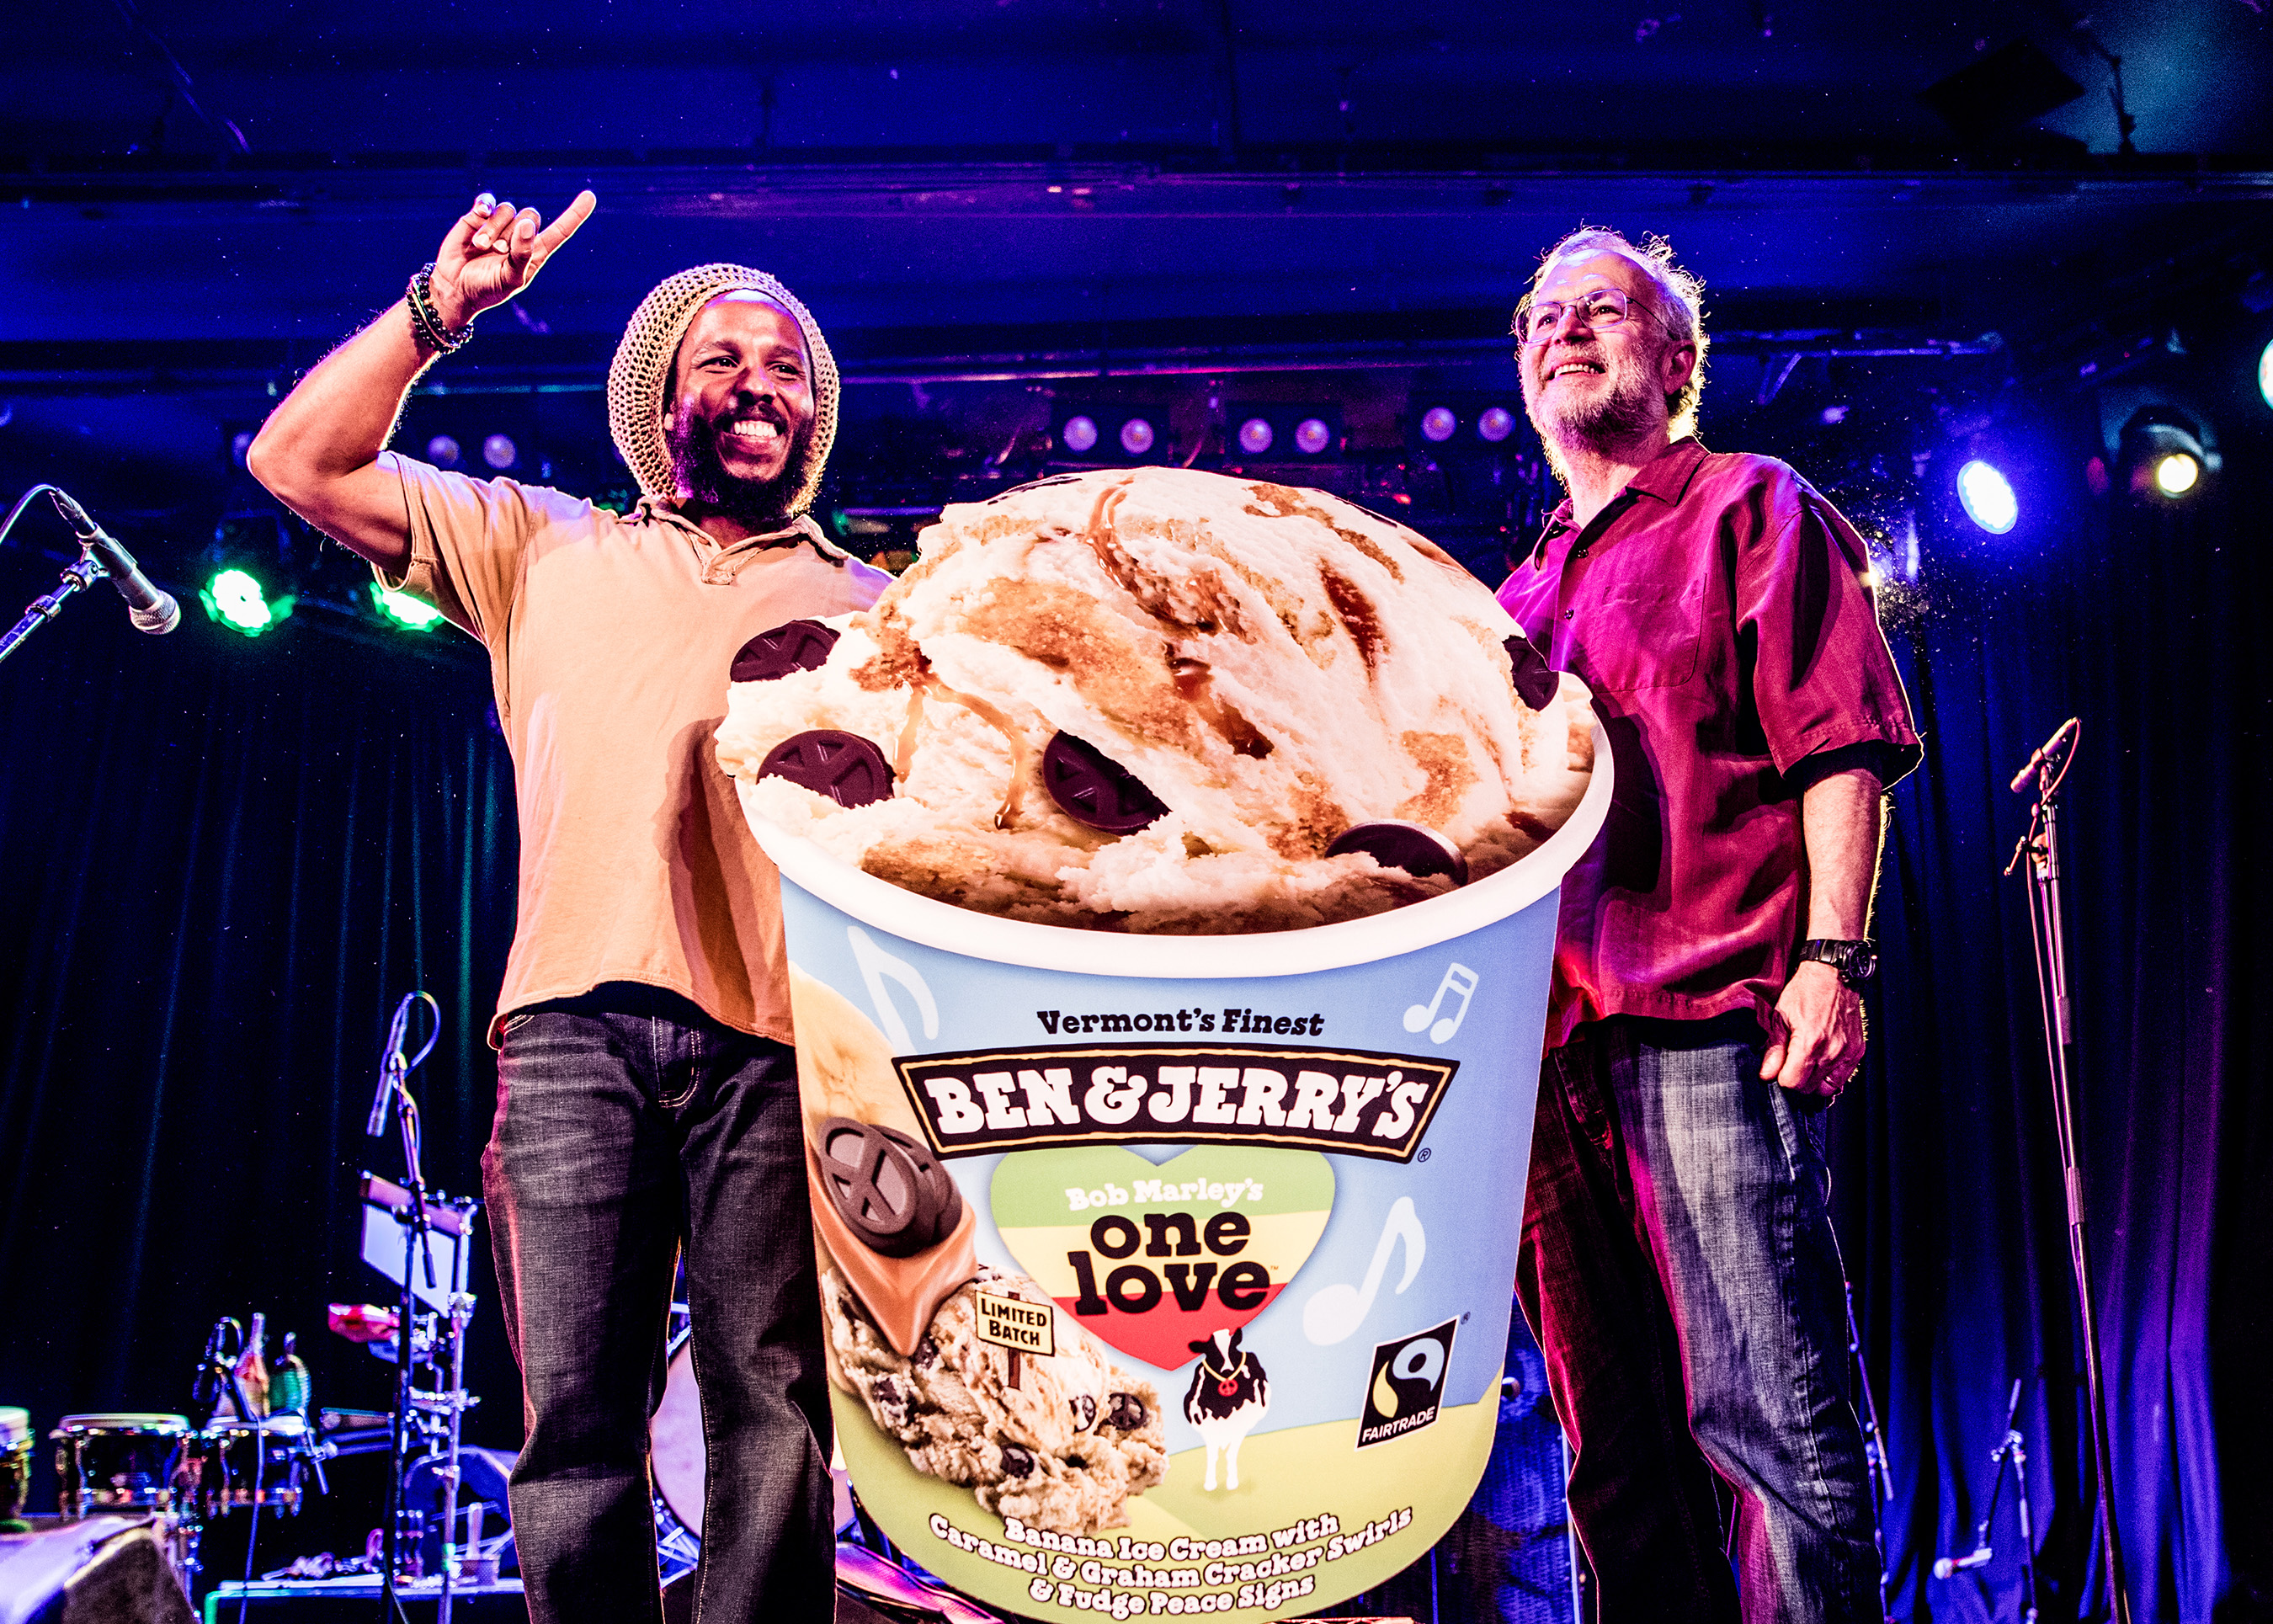 Ben & Jerry's and Ziggy Marley celebrated the launch of the new One Love limited batch flavor available at Scoop Shops and retailers nationwide in Los Angeles at the Roxy Theatre on Monday, May 22.